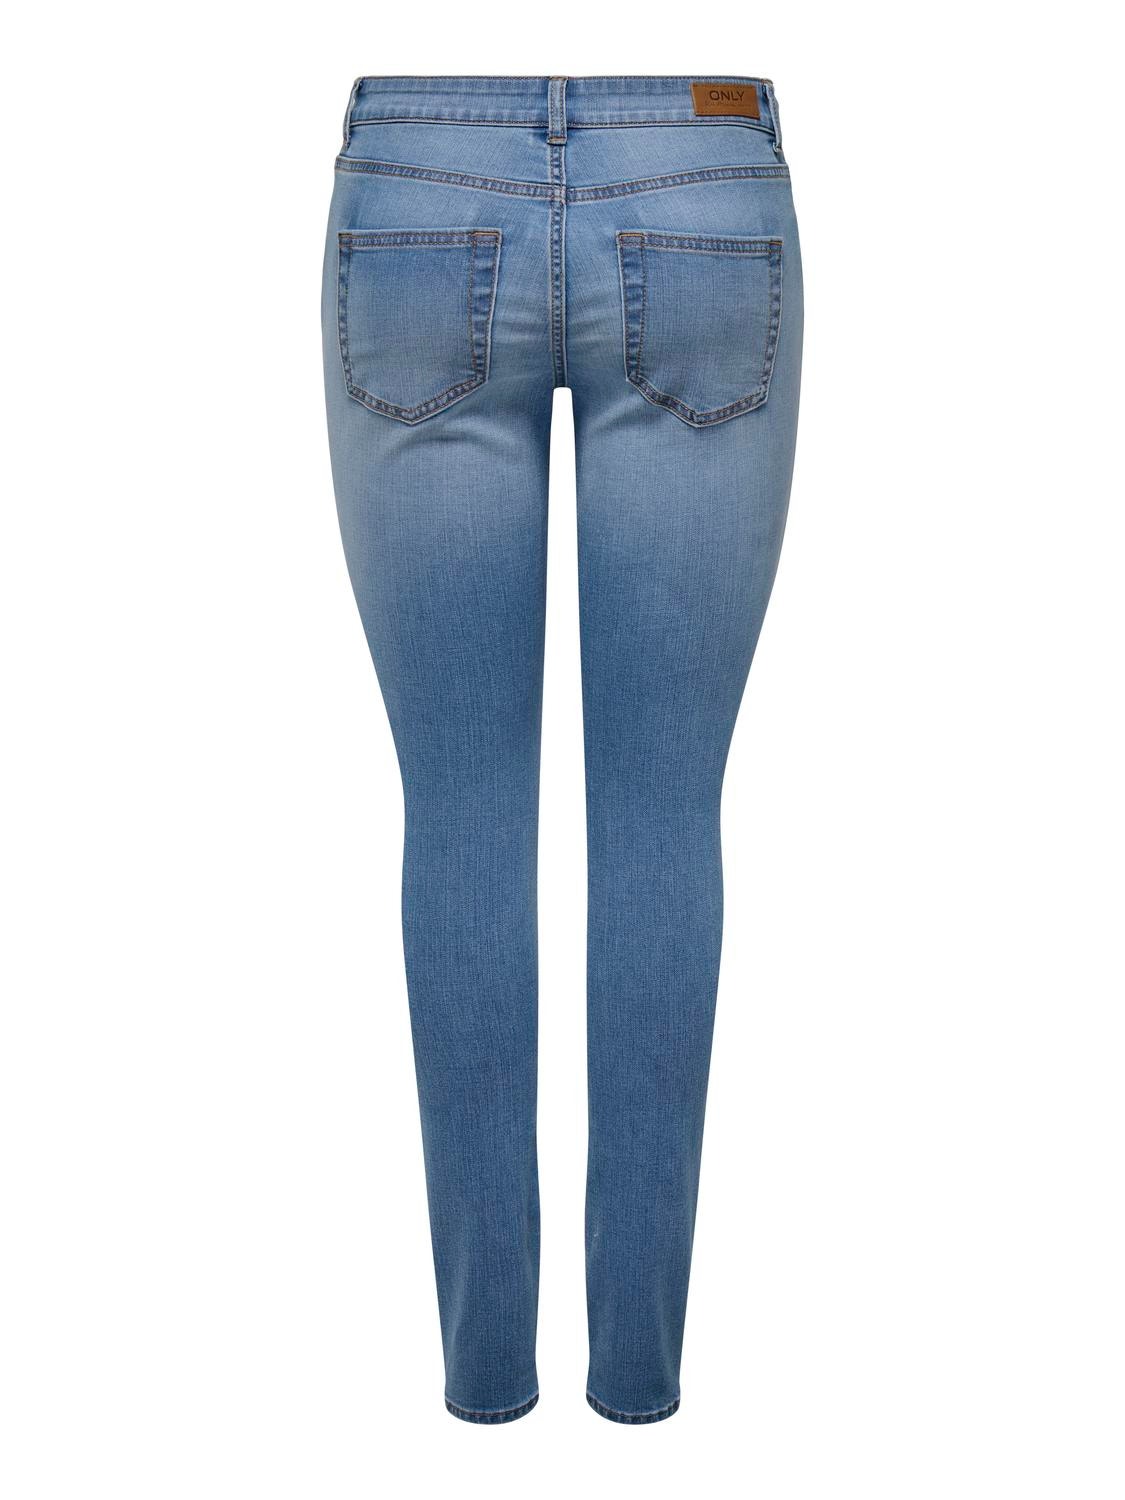 ONLY Jeans Skinny Fit Taille moyenne -Light Blue Denim - 15332914